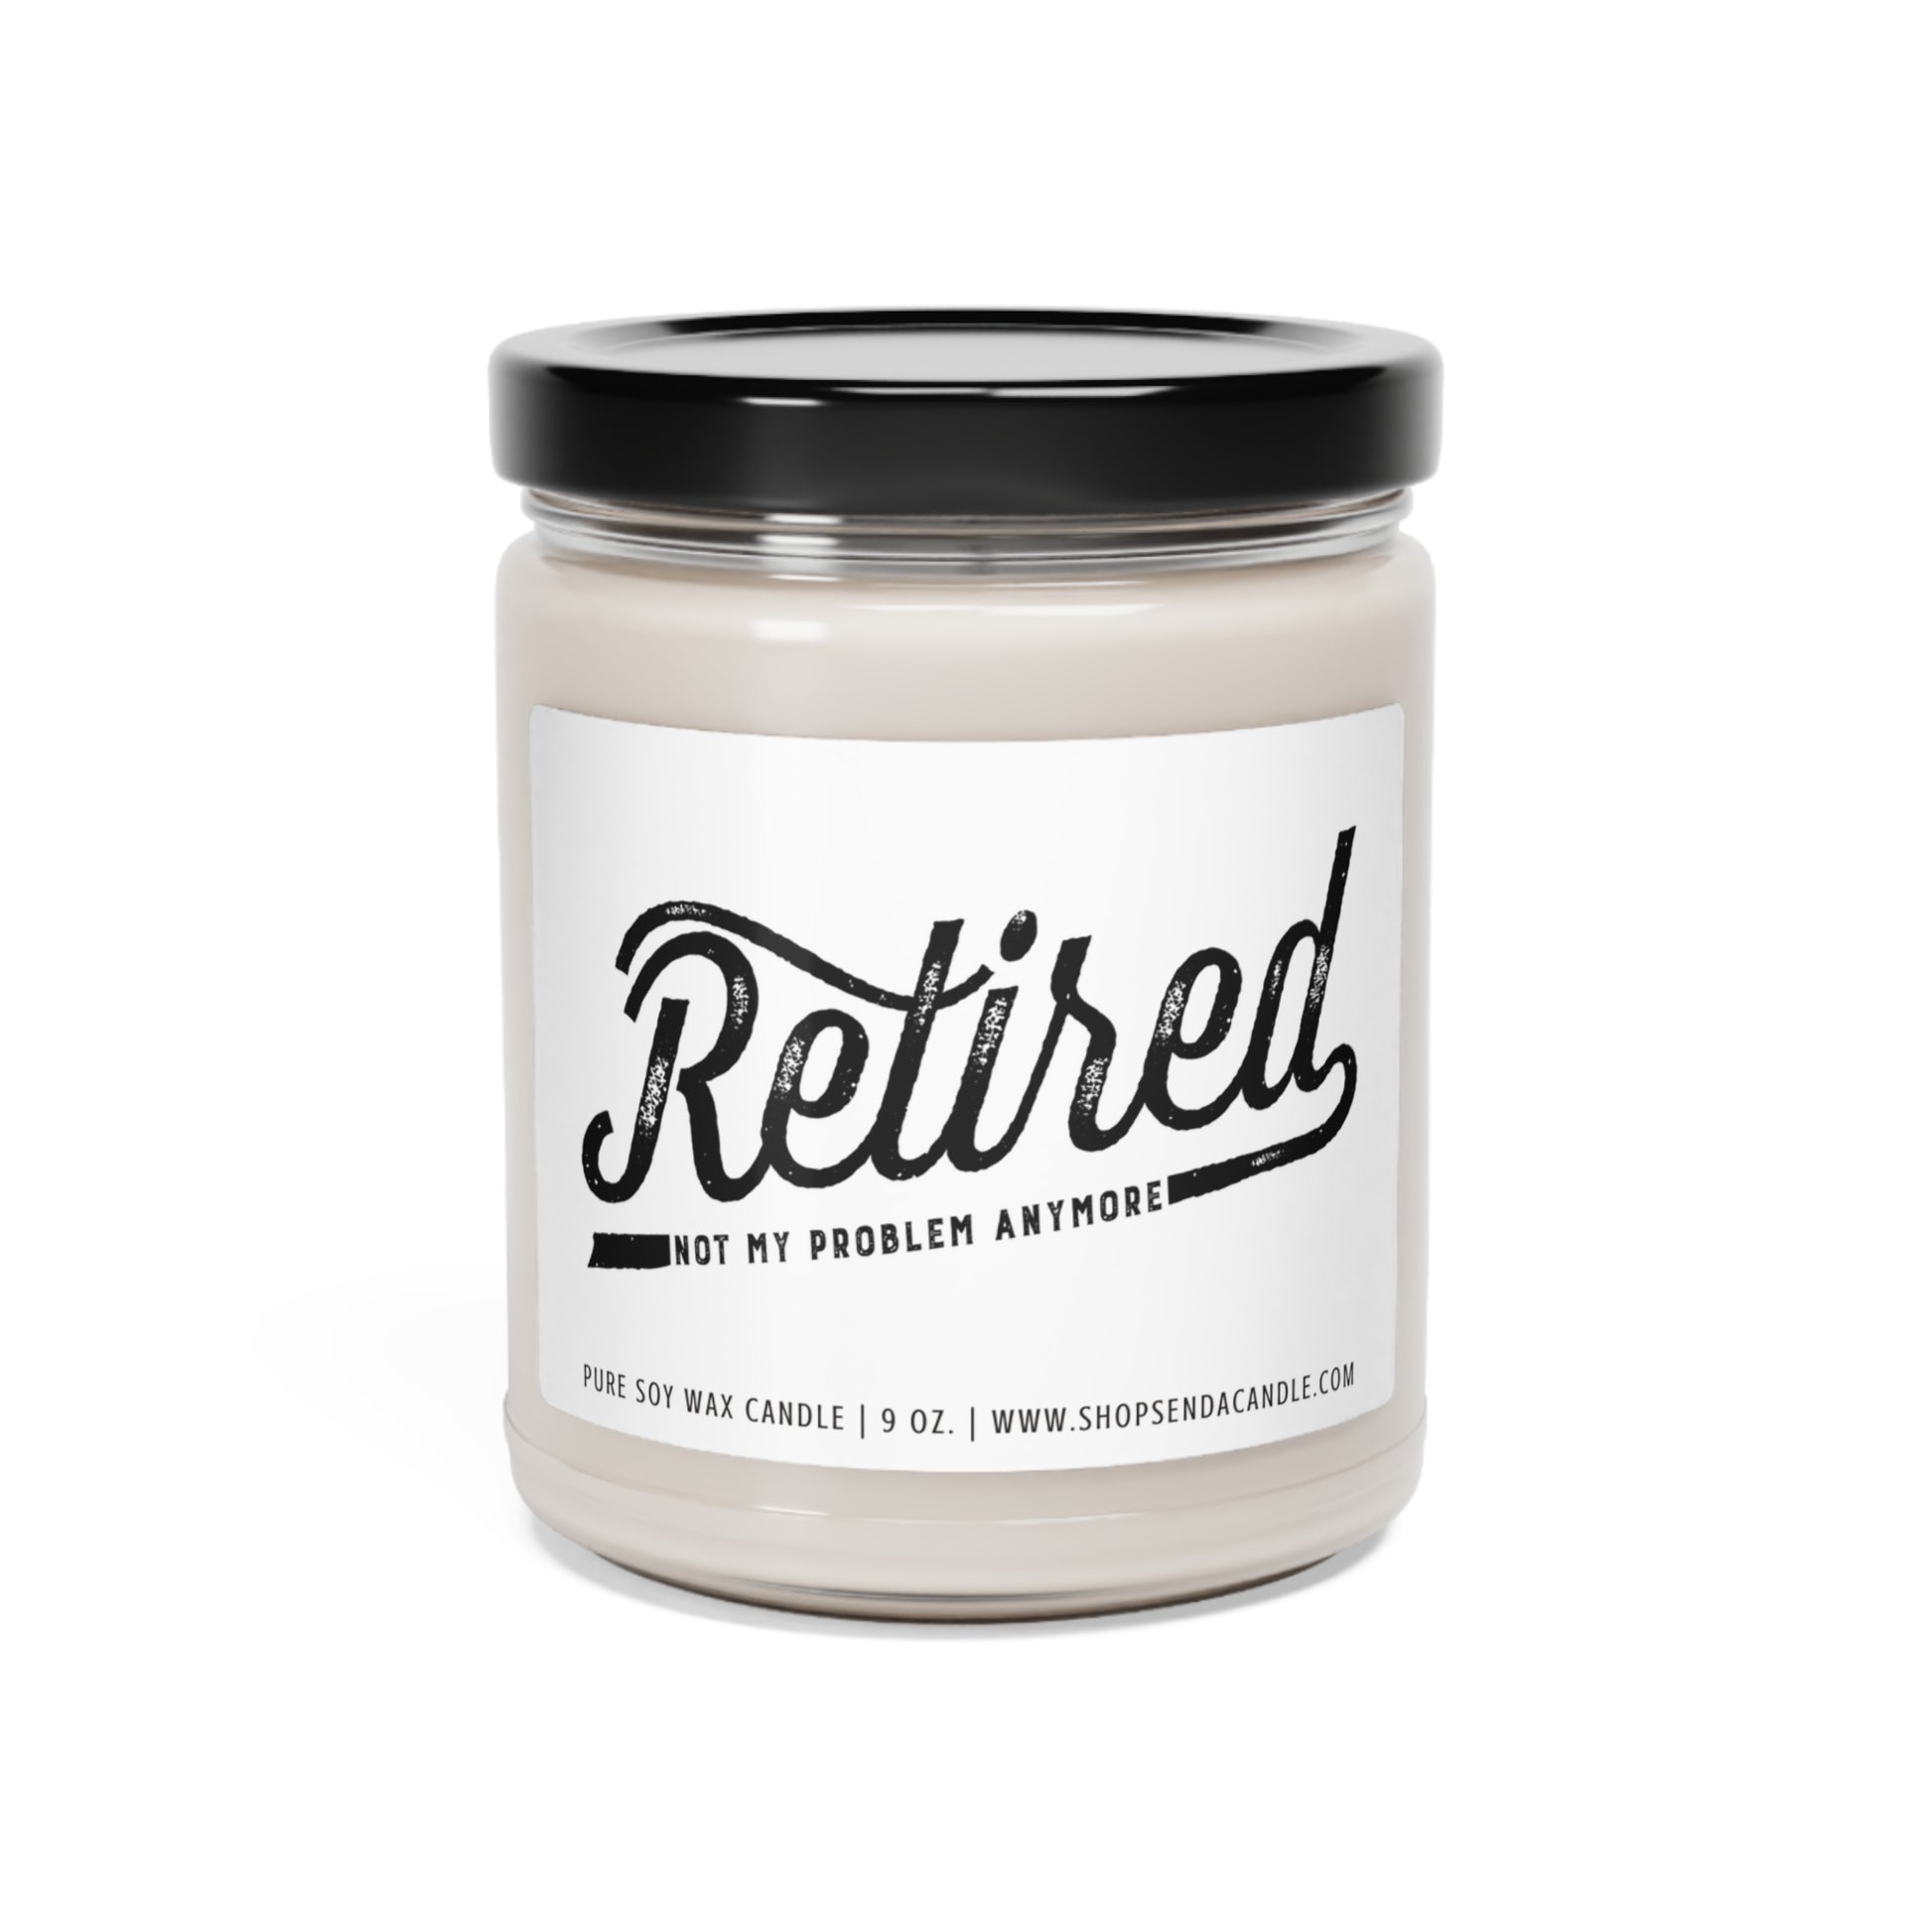 A Good Gift For Retirement | Send A Candle